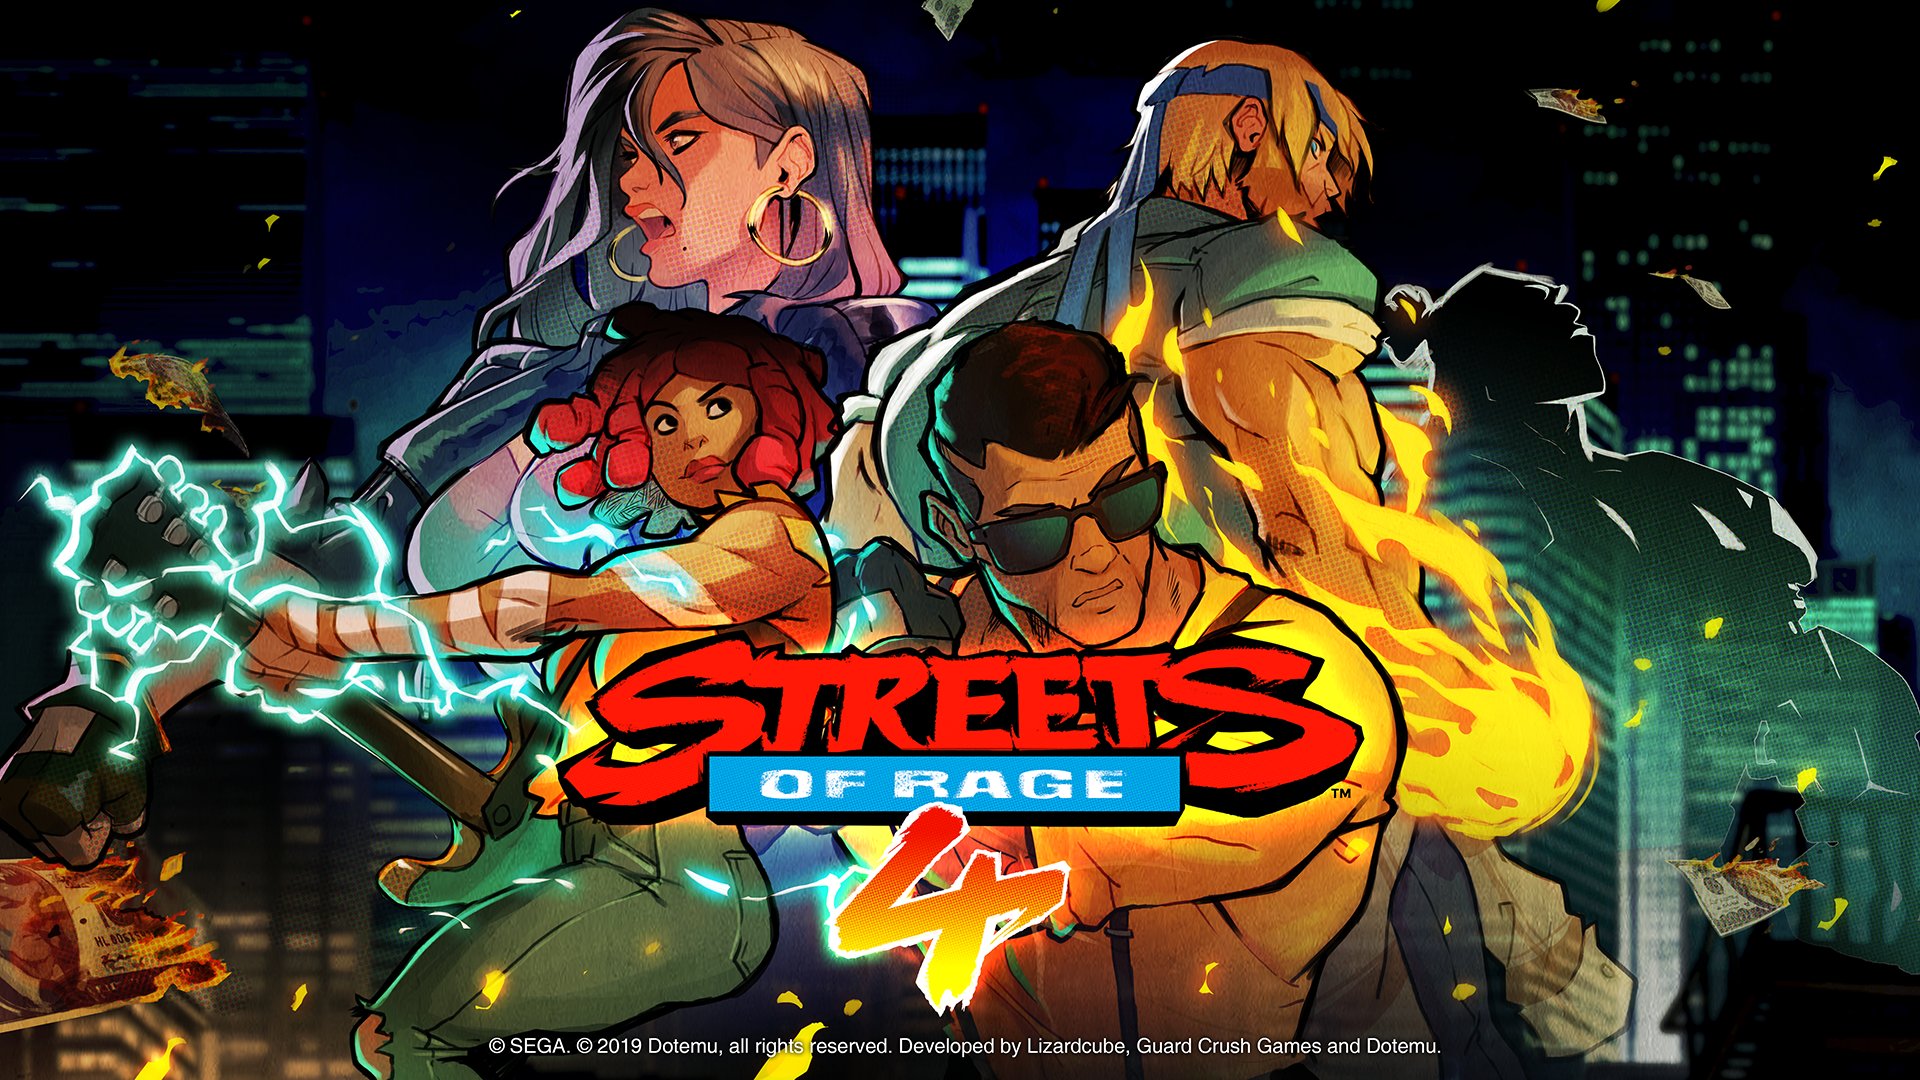 Limited Run Games on X: We're excited to announce that we will be doing a  physical Limited Run of Streets of Rage 4. More details to come!  t.co7L3b0Jp0oT  X